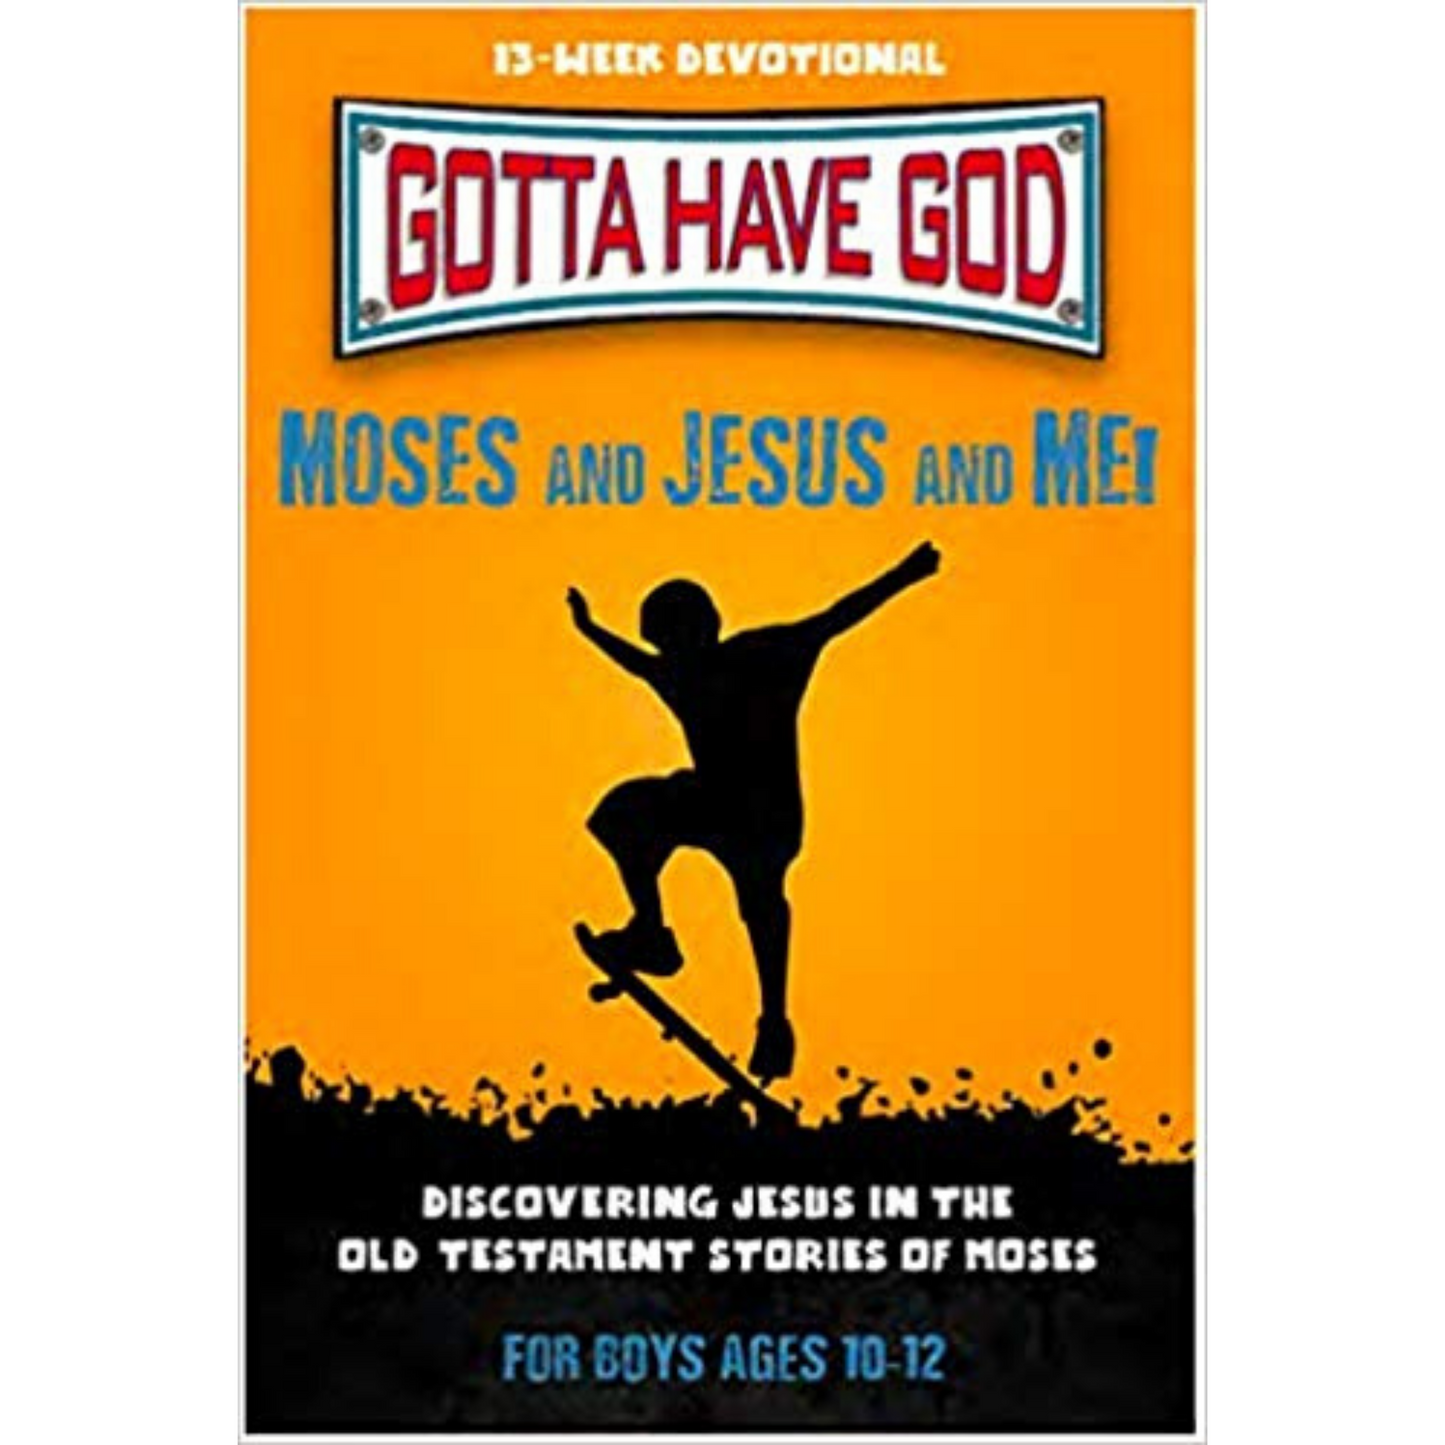 Gotta Have God Devotional - Moses and Jesus and Me! (For Boys, Ages 10-12)